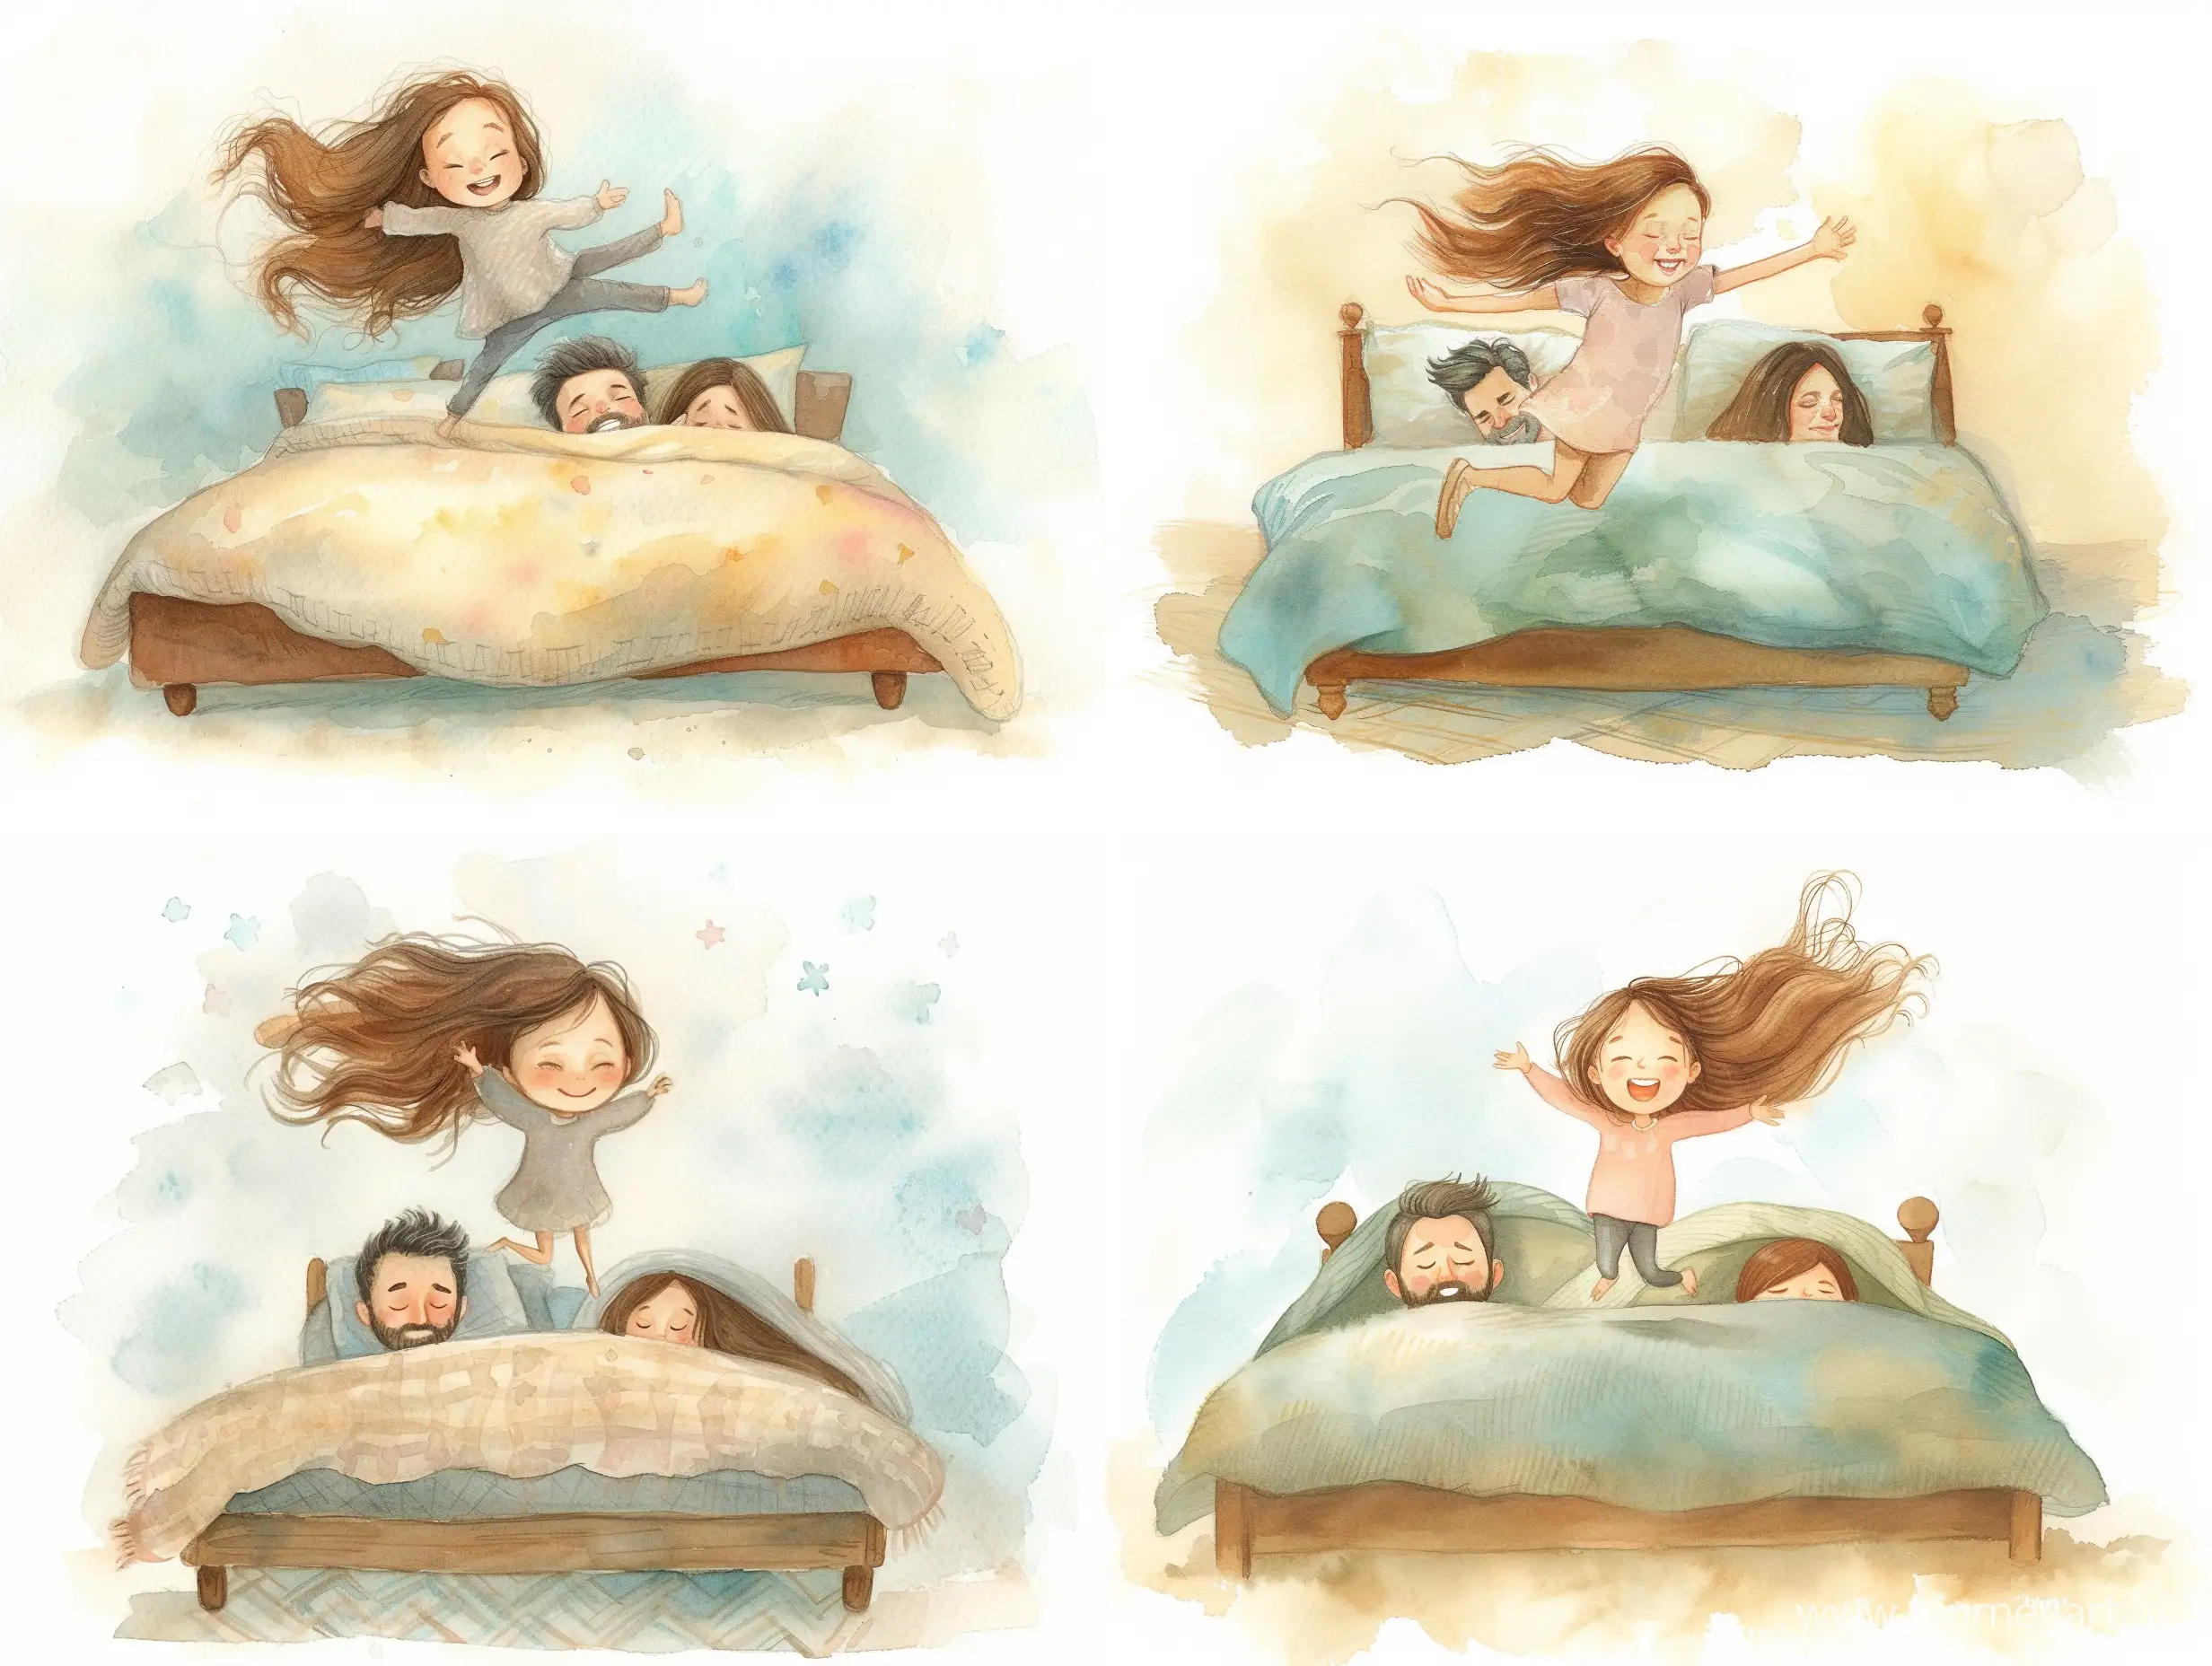 Whimsical-Watercolor-Illustration-Playful-Family-Moments-on-a-Cozy-Bed